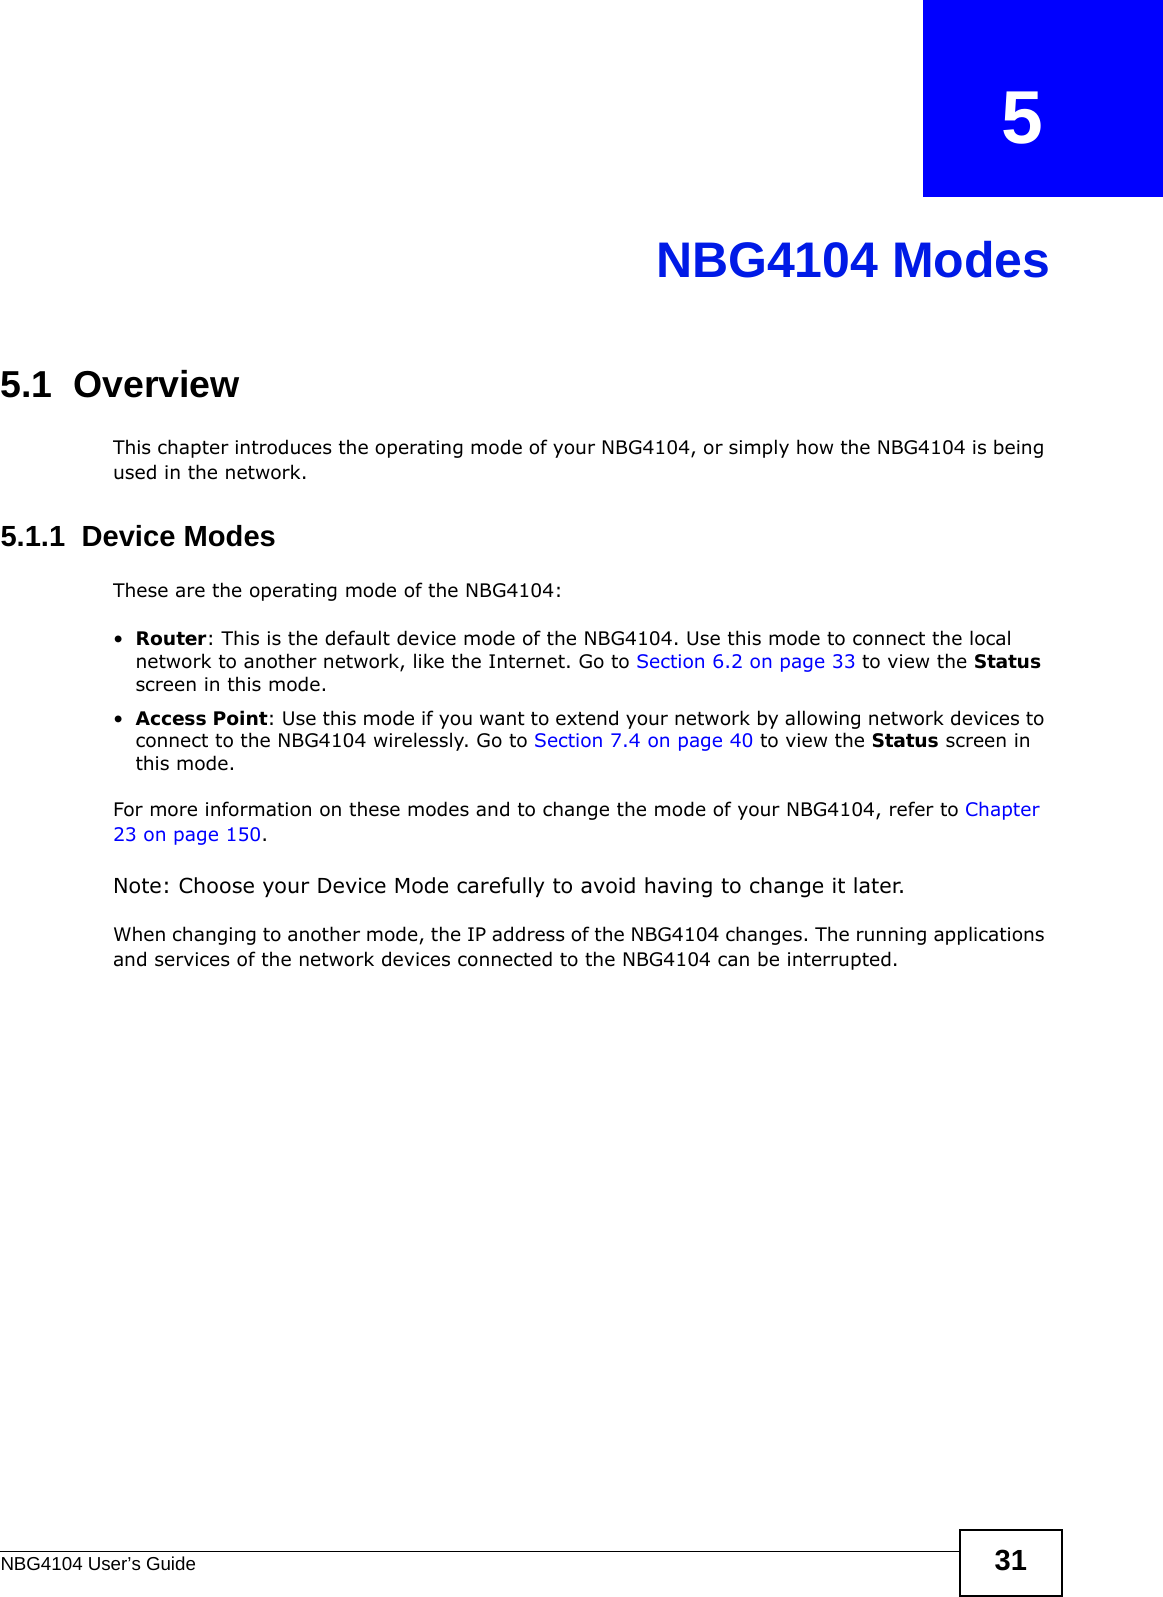 NBG4104 User’s Guide 31CHAPTER   5NBG4104 Modes5.1  OverviewThis chapter introduces the operating mode of your NBG4104, or simply how the NBG4104 is being used in the network. 5.1.1  Device ModesThese are the operating mode of the NBG4104:•Router: This is the default device mode of the NBG4104. Use this mode to connect the local network to another network, like the Internet. Go to Section 6.2 on page 33 to view the Status screen in this mode.•Access Point: Use this mode if you want to extend your network by allowing network devices to connect to the NBG4104 wirelessly. Go to Section 7.4 on page 40 to view the Status screen in this mode.For more information on these modes and to change the mode of your NBG4104, refer to Chapter 23 on page 150.Note: Choose your Device Mode carefully to avoid having to change it later.When changing to another mode, the IP address of the NBG4104 changes. The running applications and services of the network devices connected to the NBG4104 can be interrupted. 